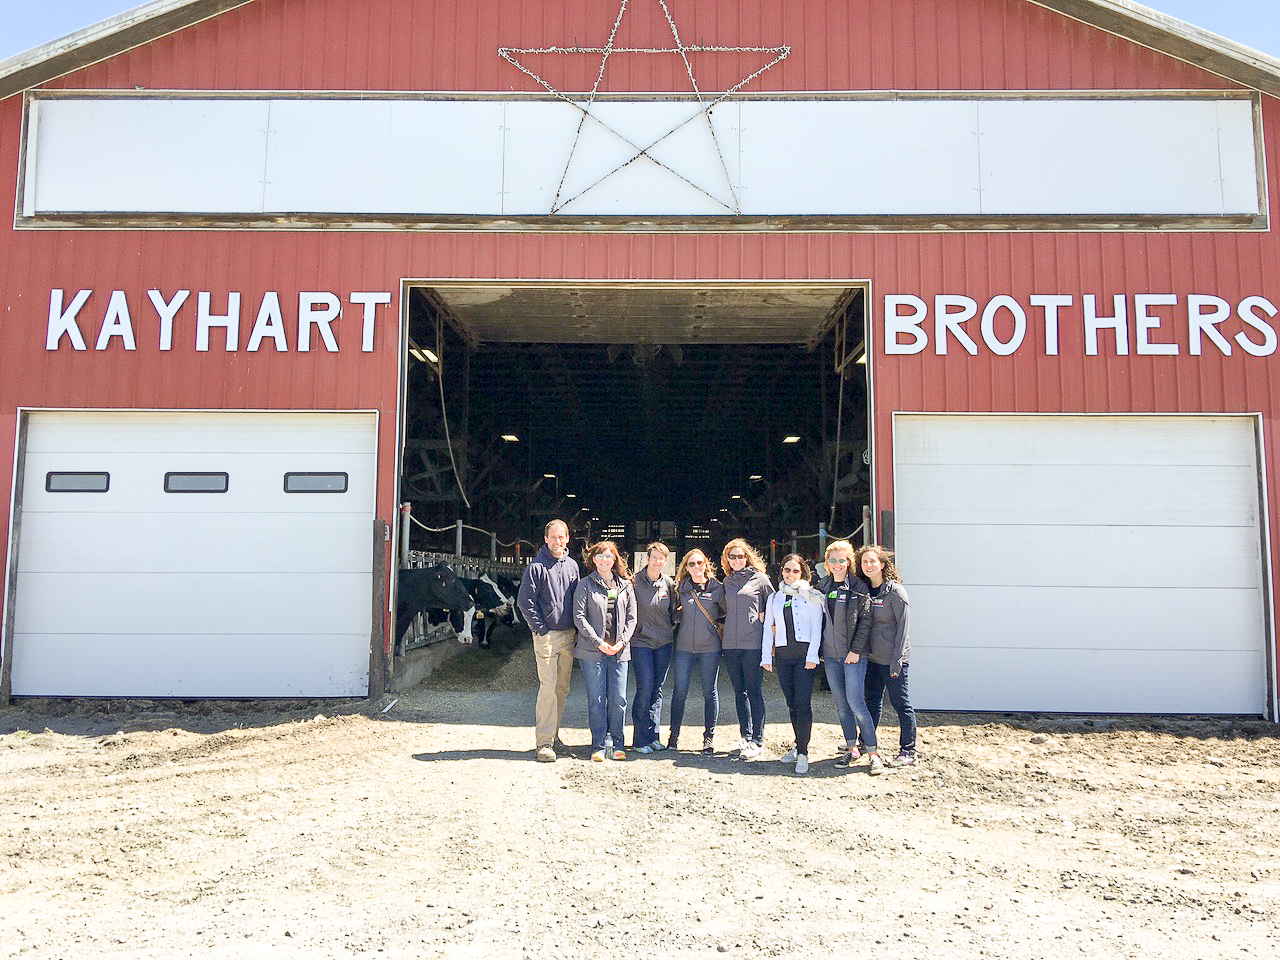 Kayhart brothers farm